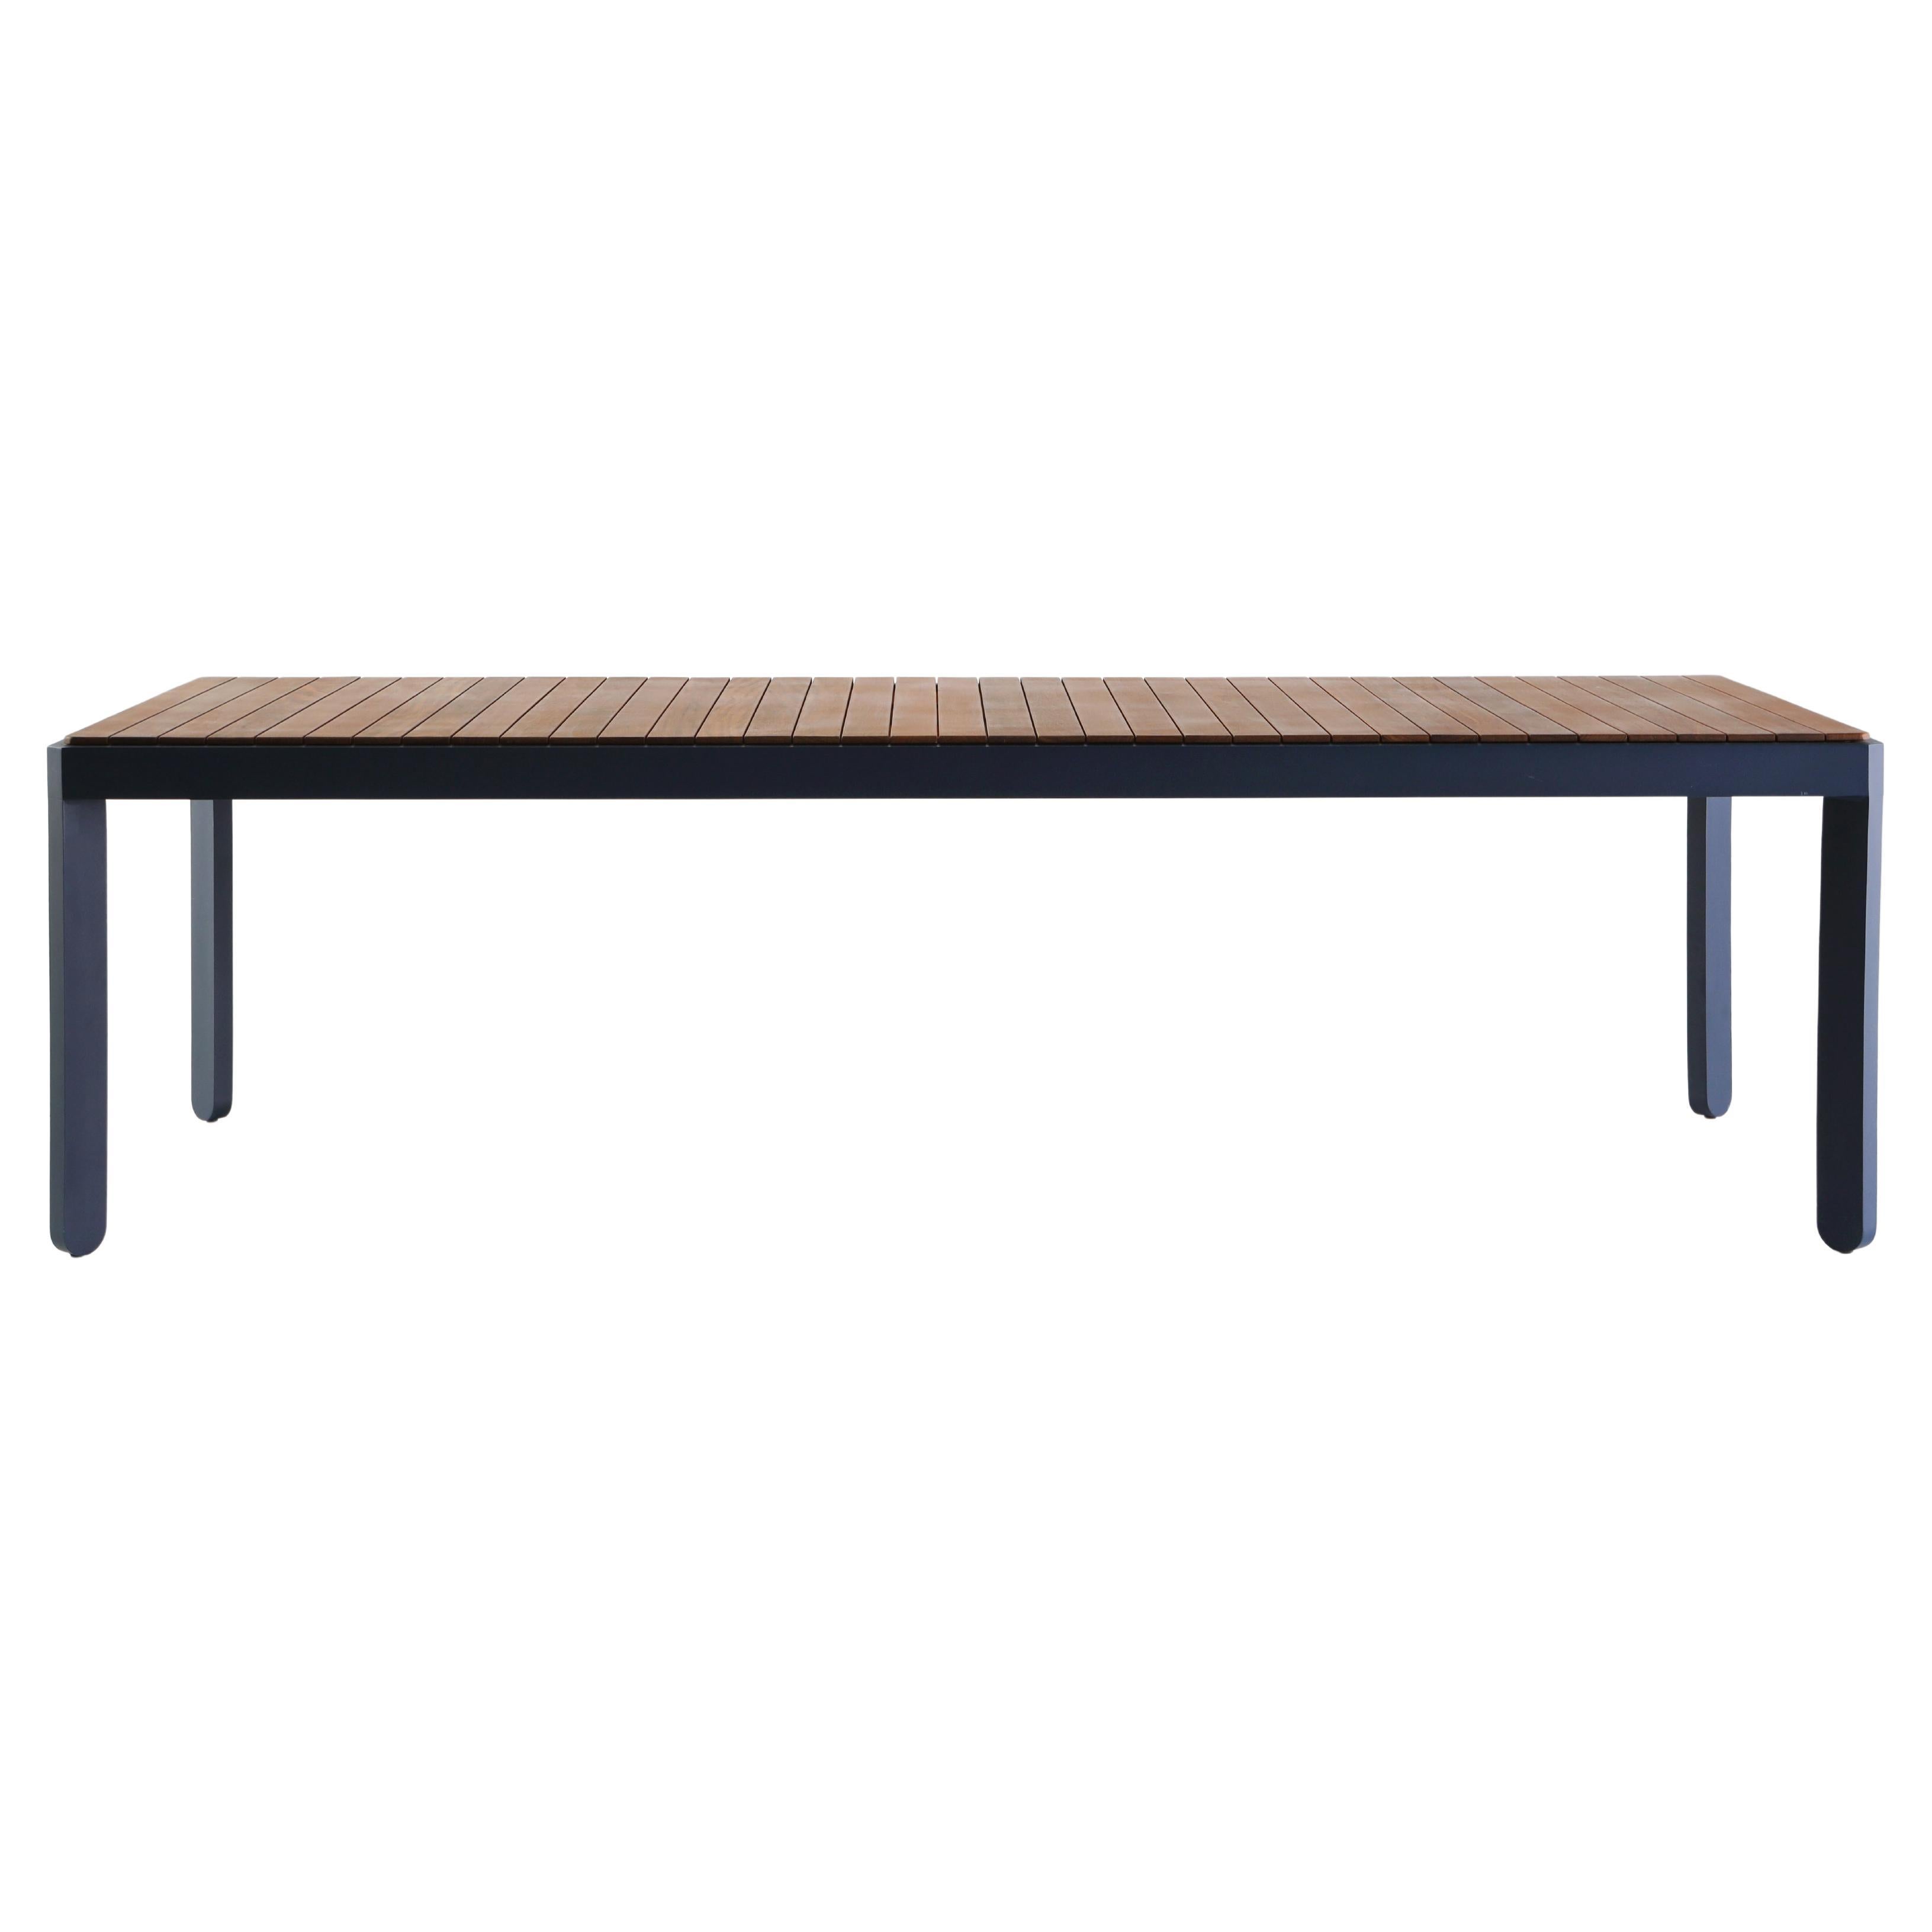 Modern Brazilian Design Dining Table for the Outdoors or Indoors For Sale